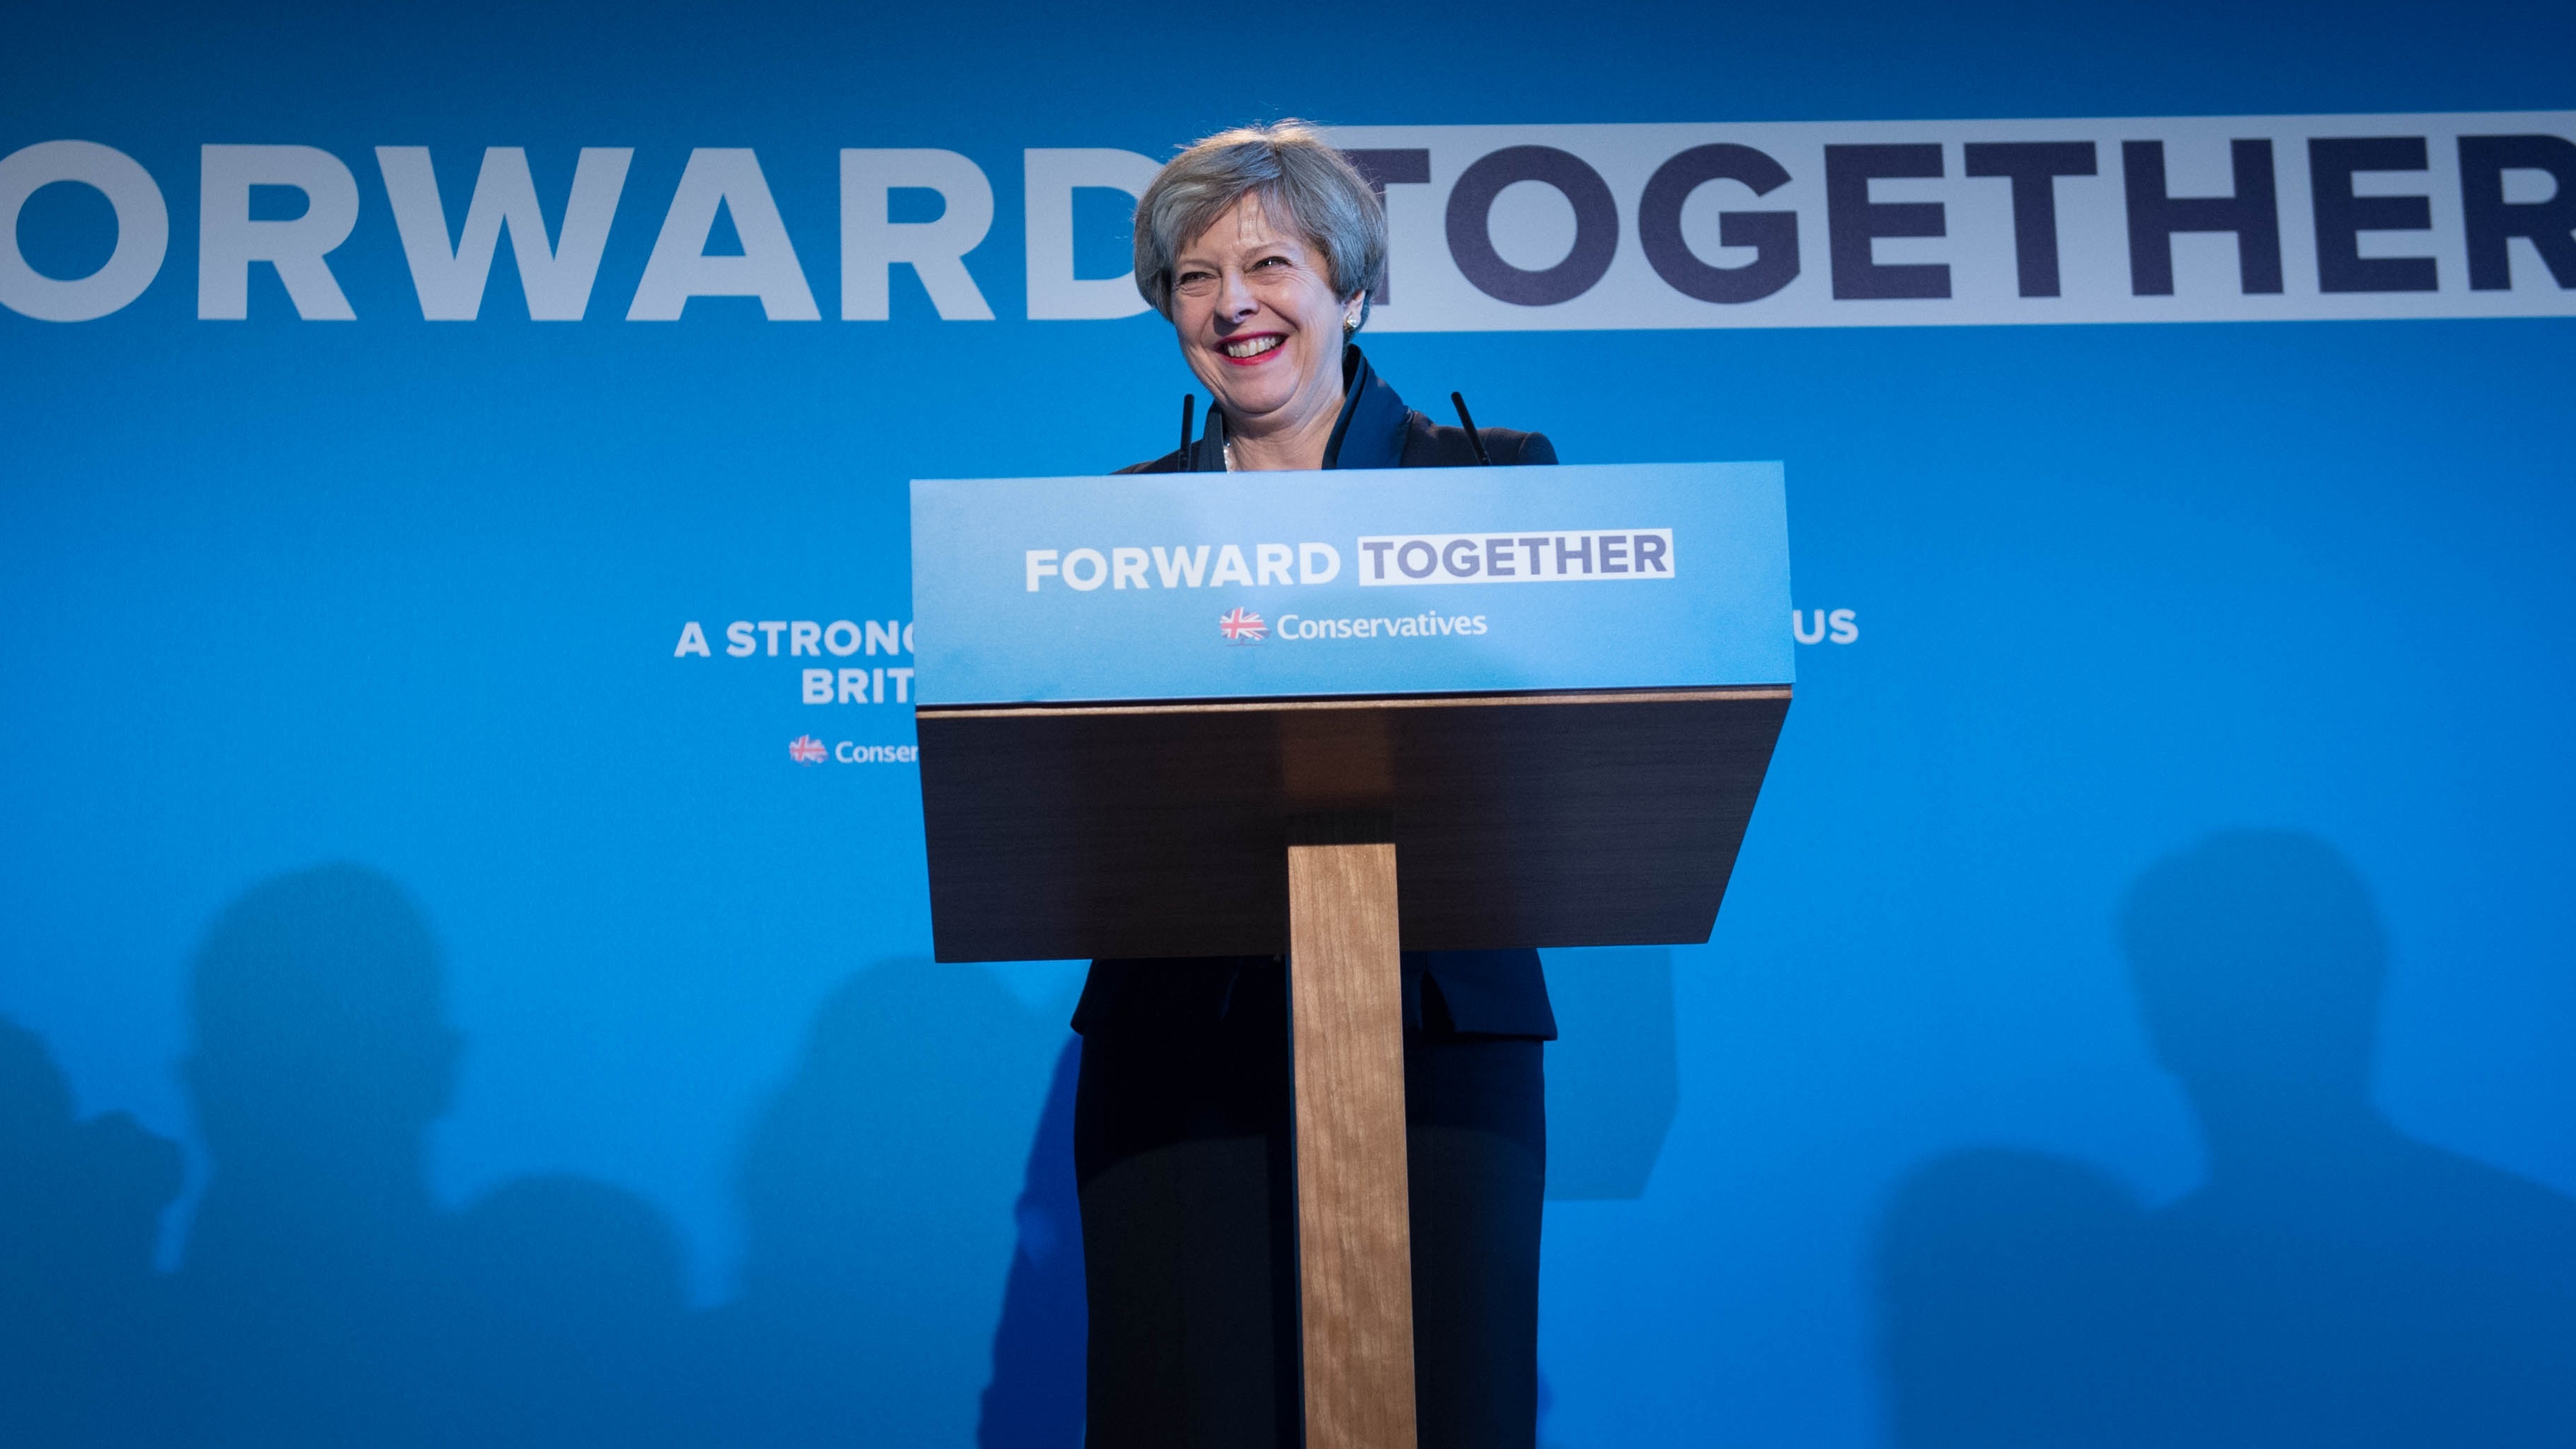 Theresa May launches the Conservative manifesto